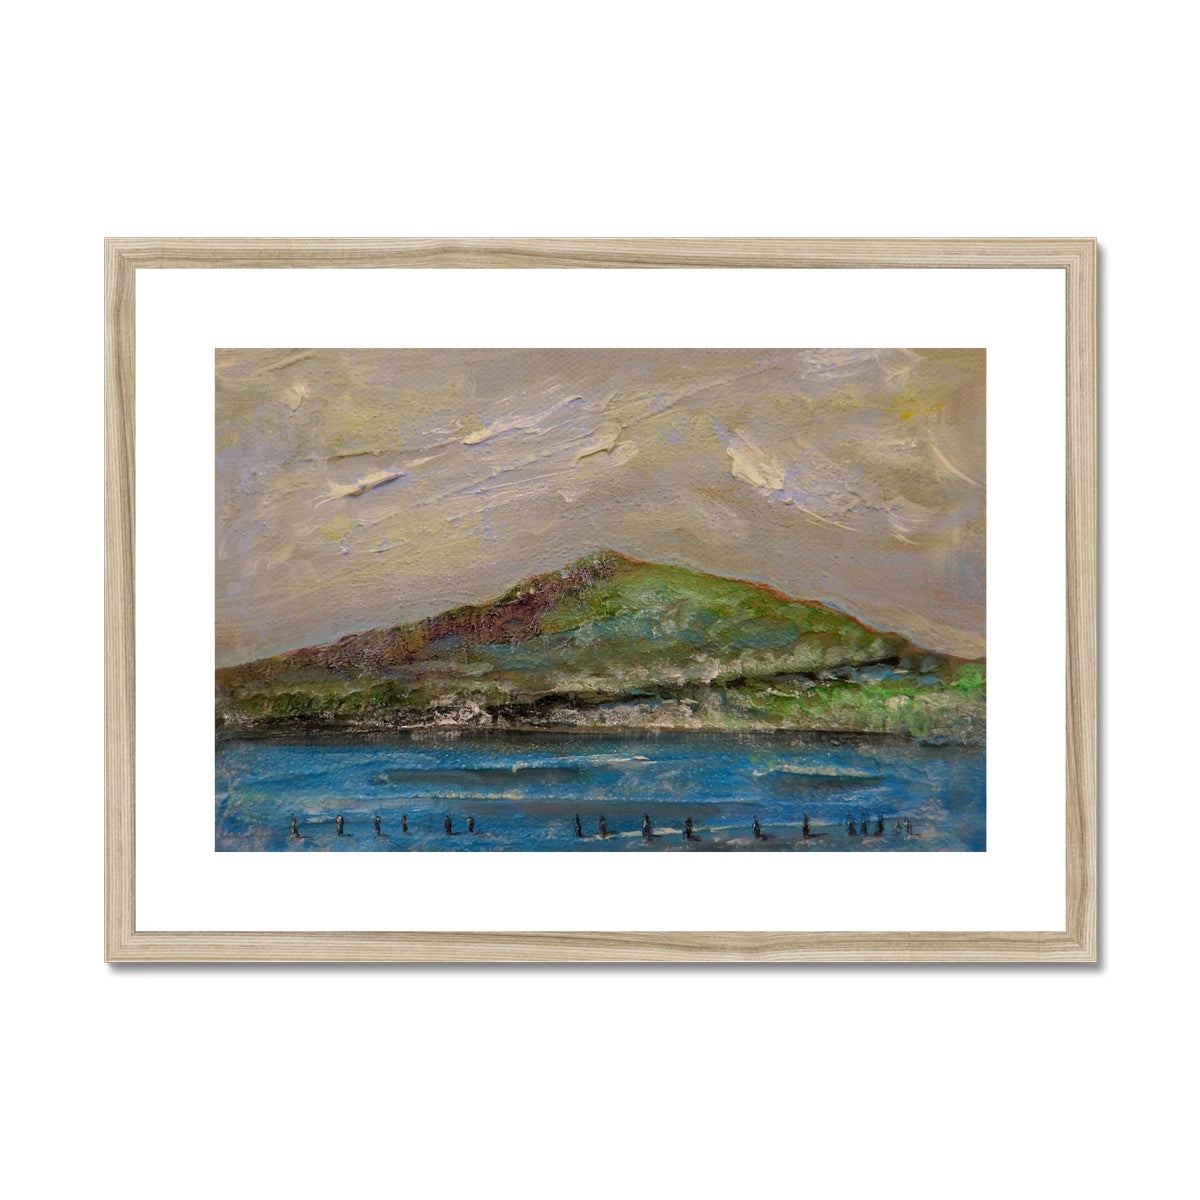 Ben Lomond iii Painting | Framed & Mounted Prints From Scotland-Framed & Mounted Prints-Scottish Lochs & Mountains Art Gallery-A2 Landscape-Natural Frame-Paintings, Prints, Homeware, Art Gifts From Scotland By Scottish Artist Kevin Hunter